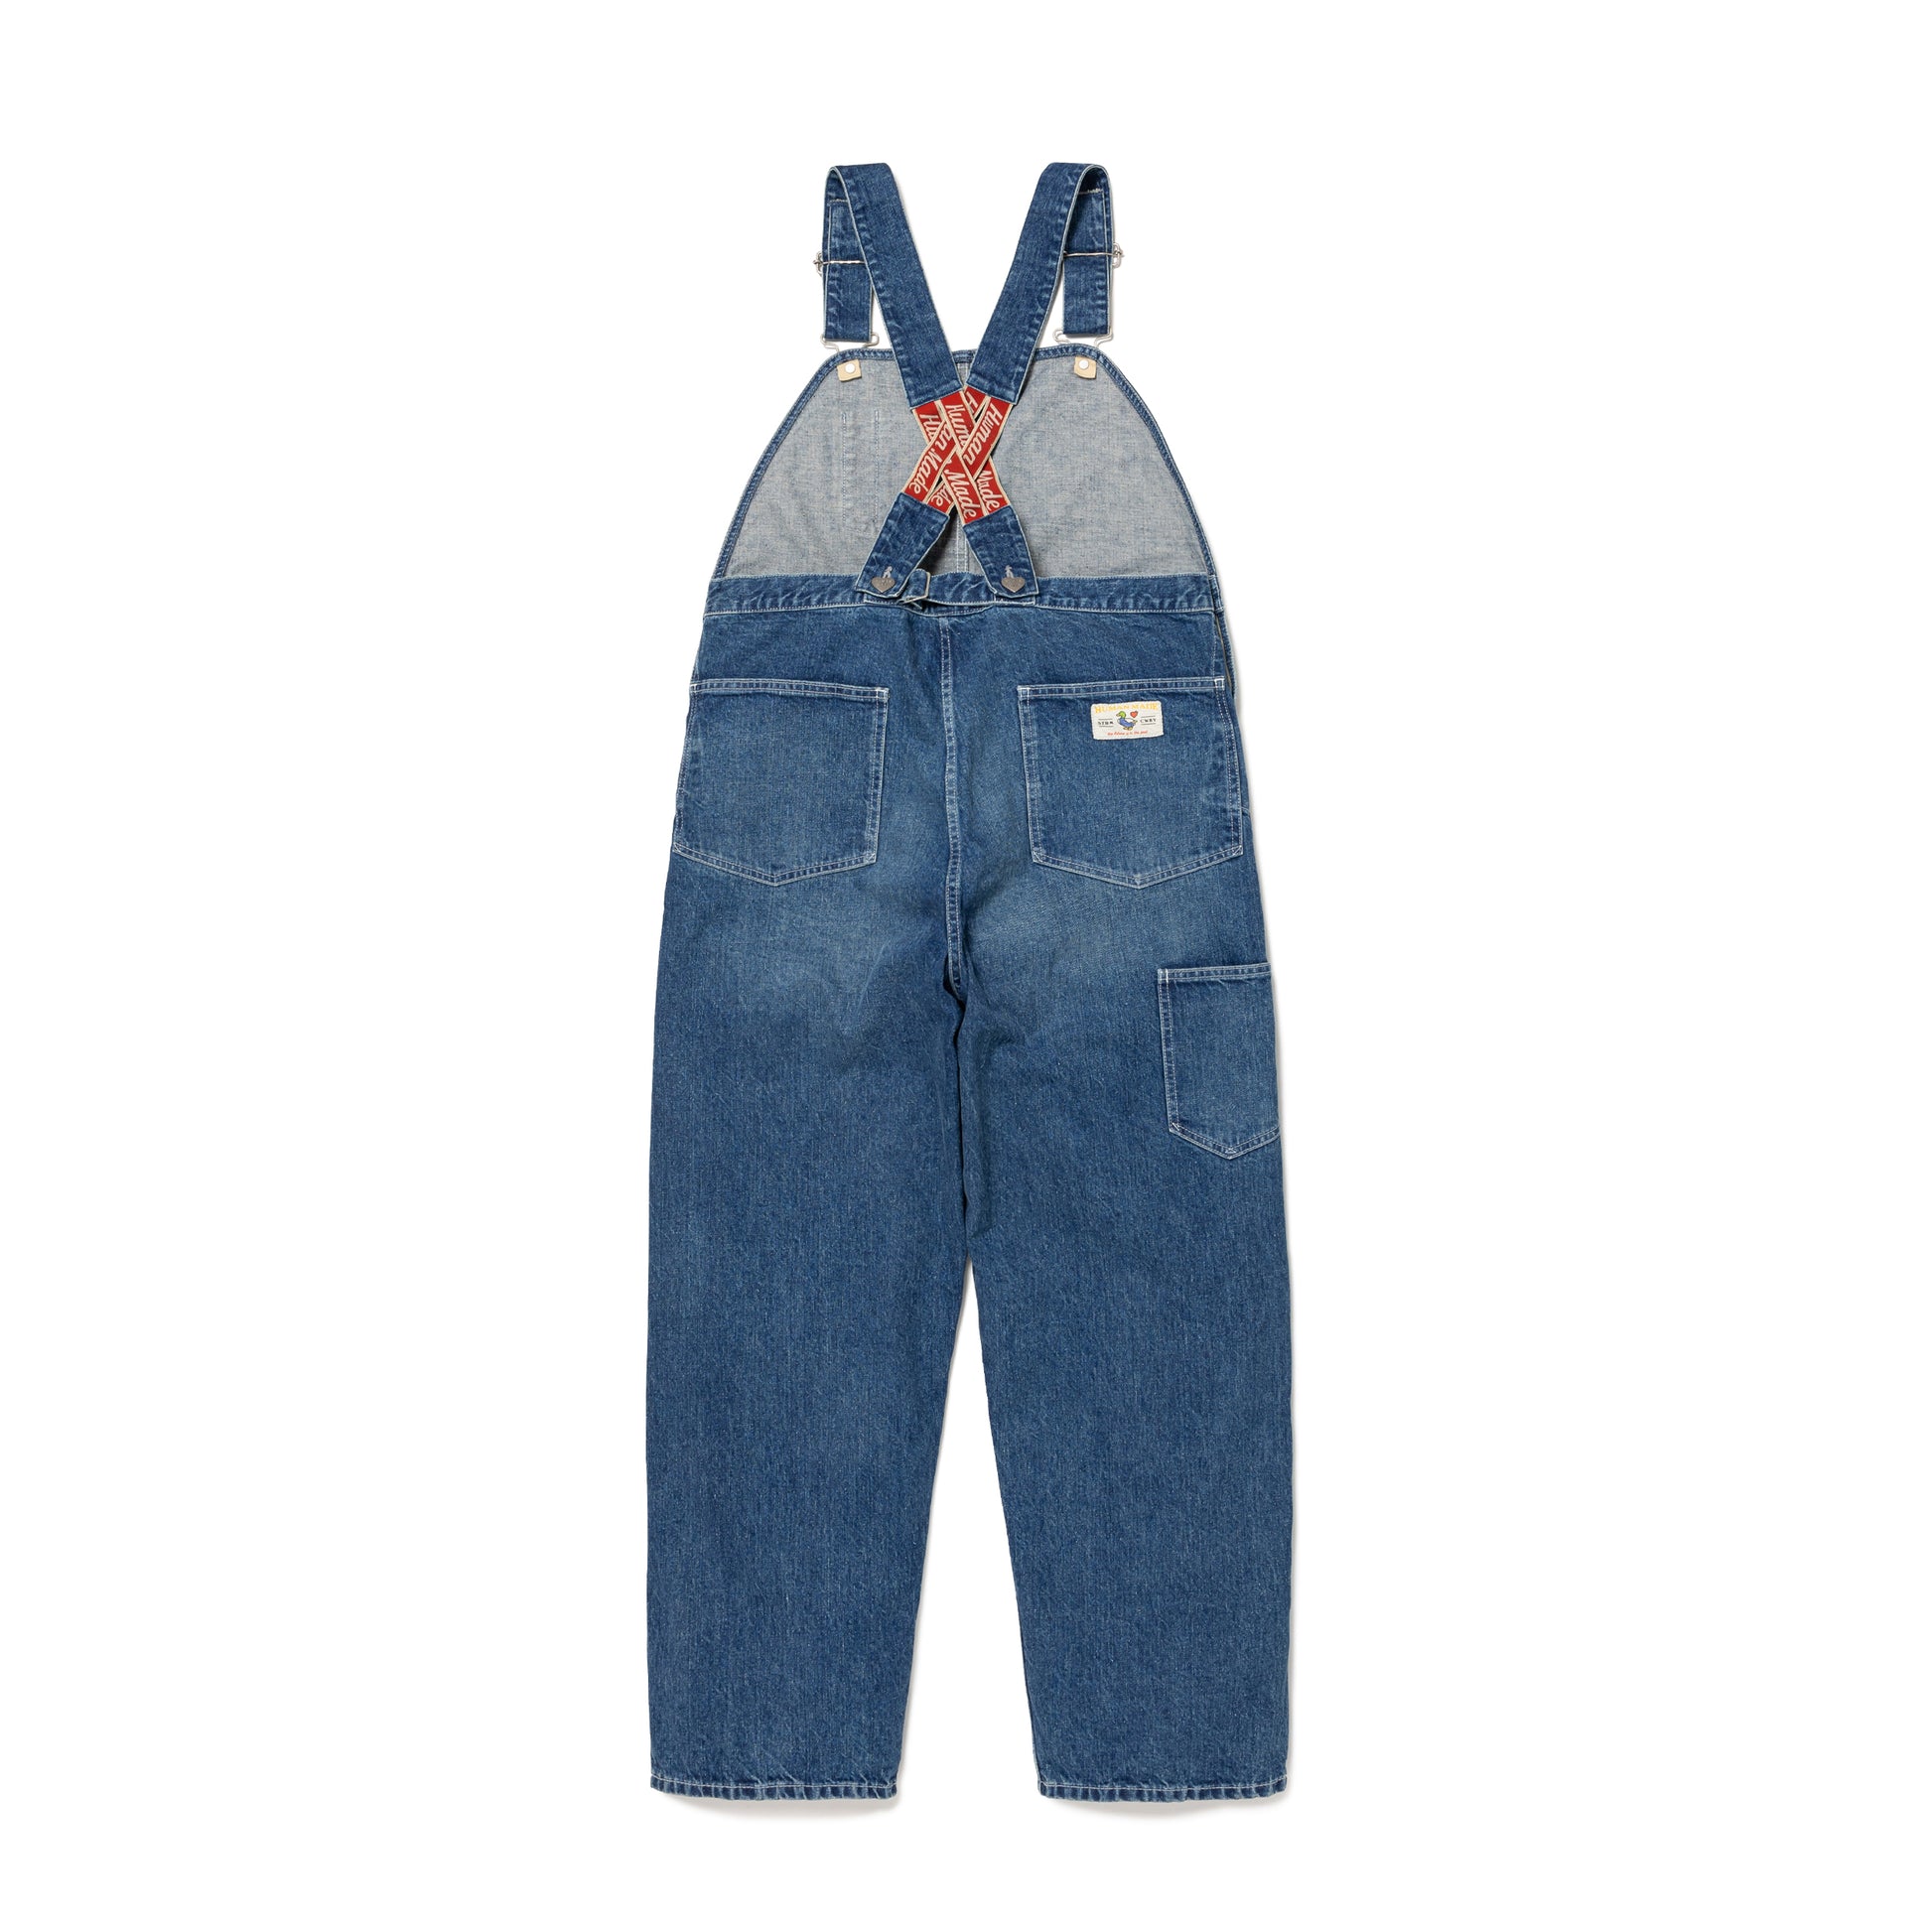 HUMAN MADE DENIM OVERALLS IN-B